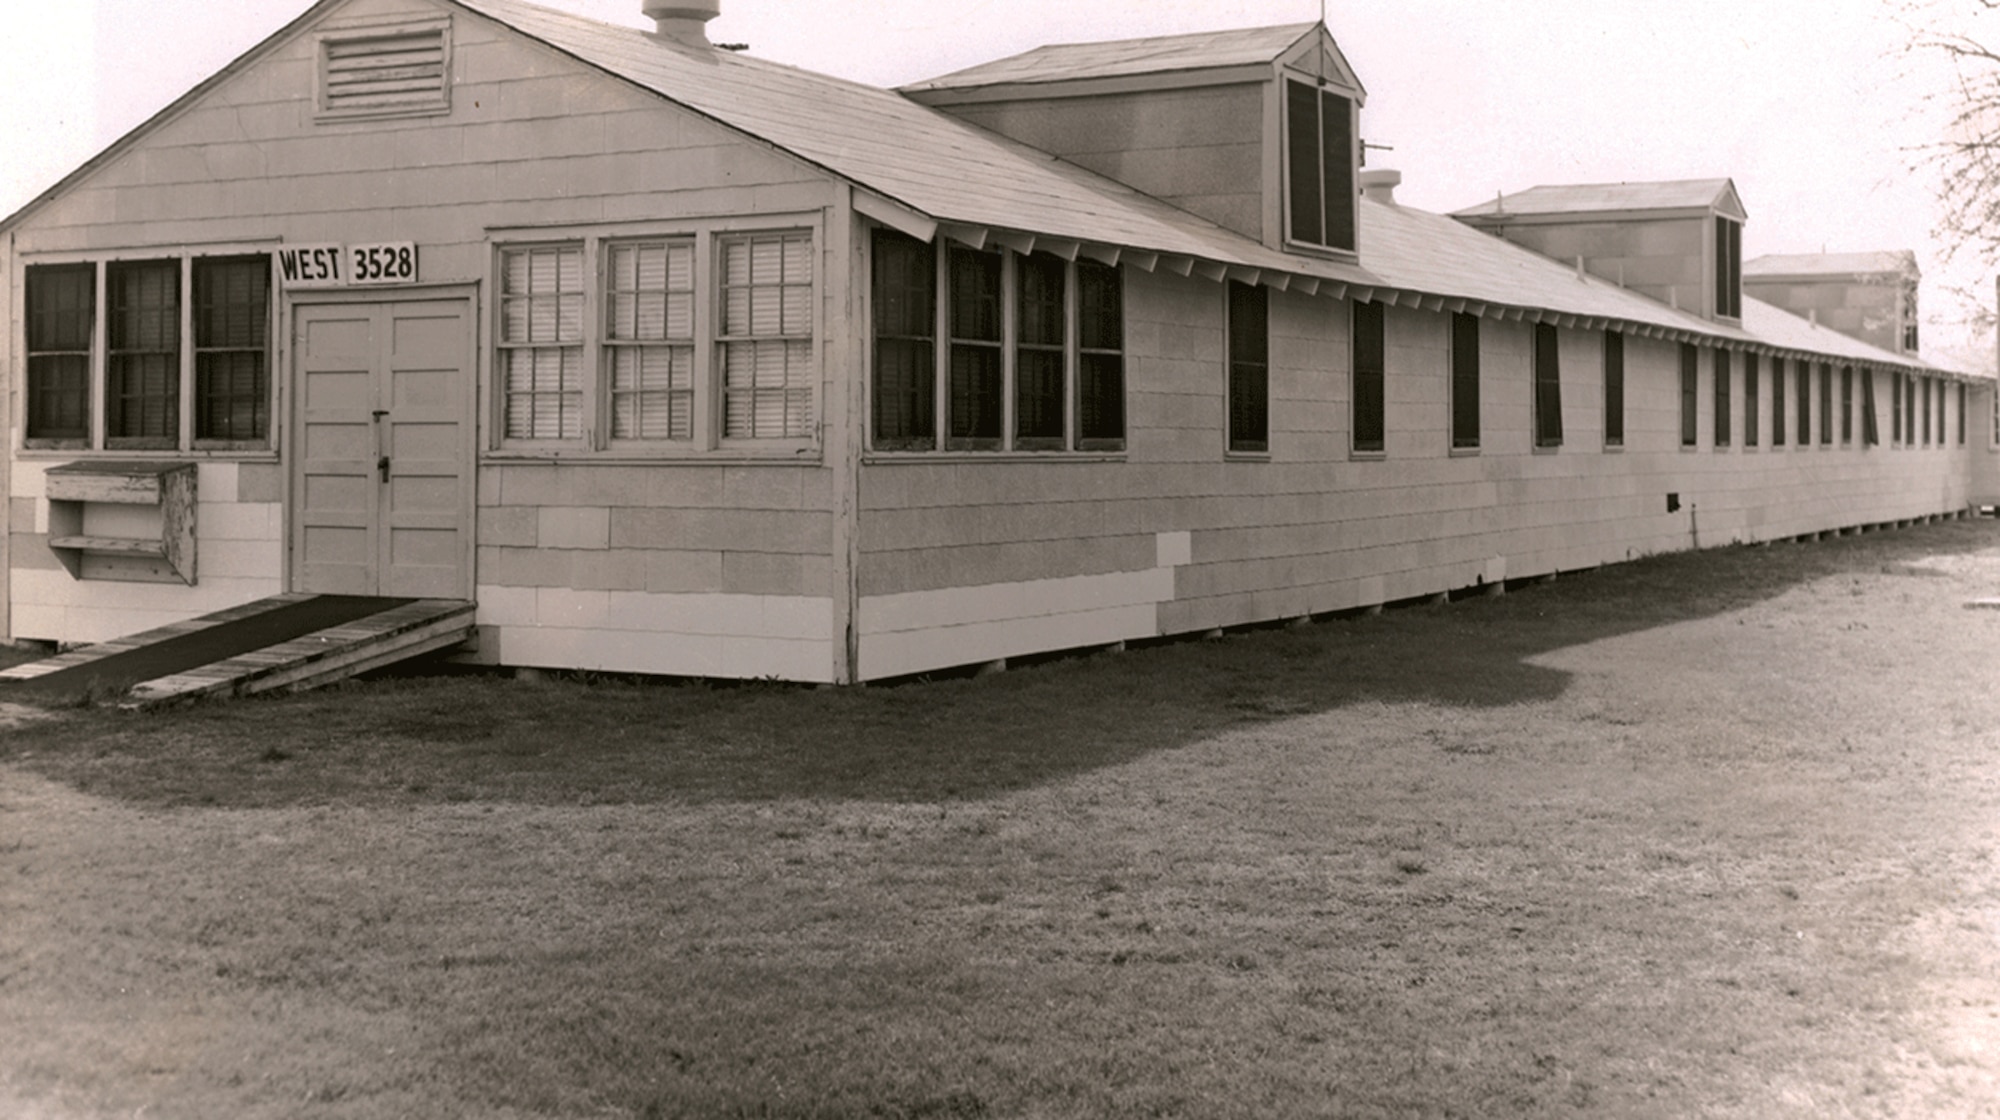 Typical example of the cantonment-style buildings used as hospitals at Lackland Air Force Base prior to the construction of Wilford Hall Medical Center in 1957. Building 3528 was located on the east side of 14th St. (now Ladd St.), north of Ave E (now Kenley Ave), and was also known as Ward A14. (Courtesy photo)